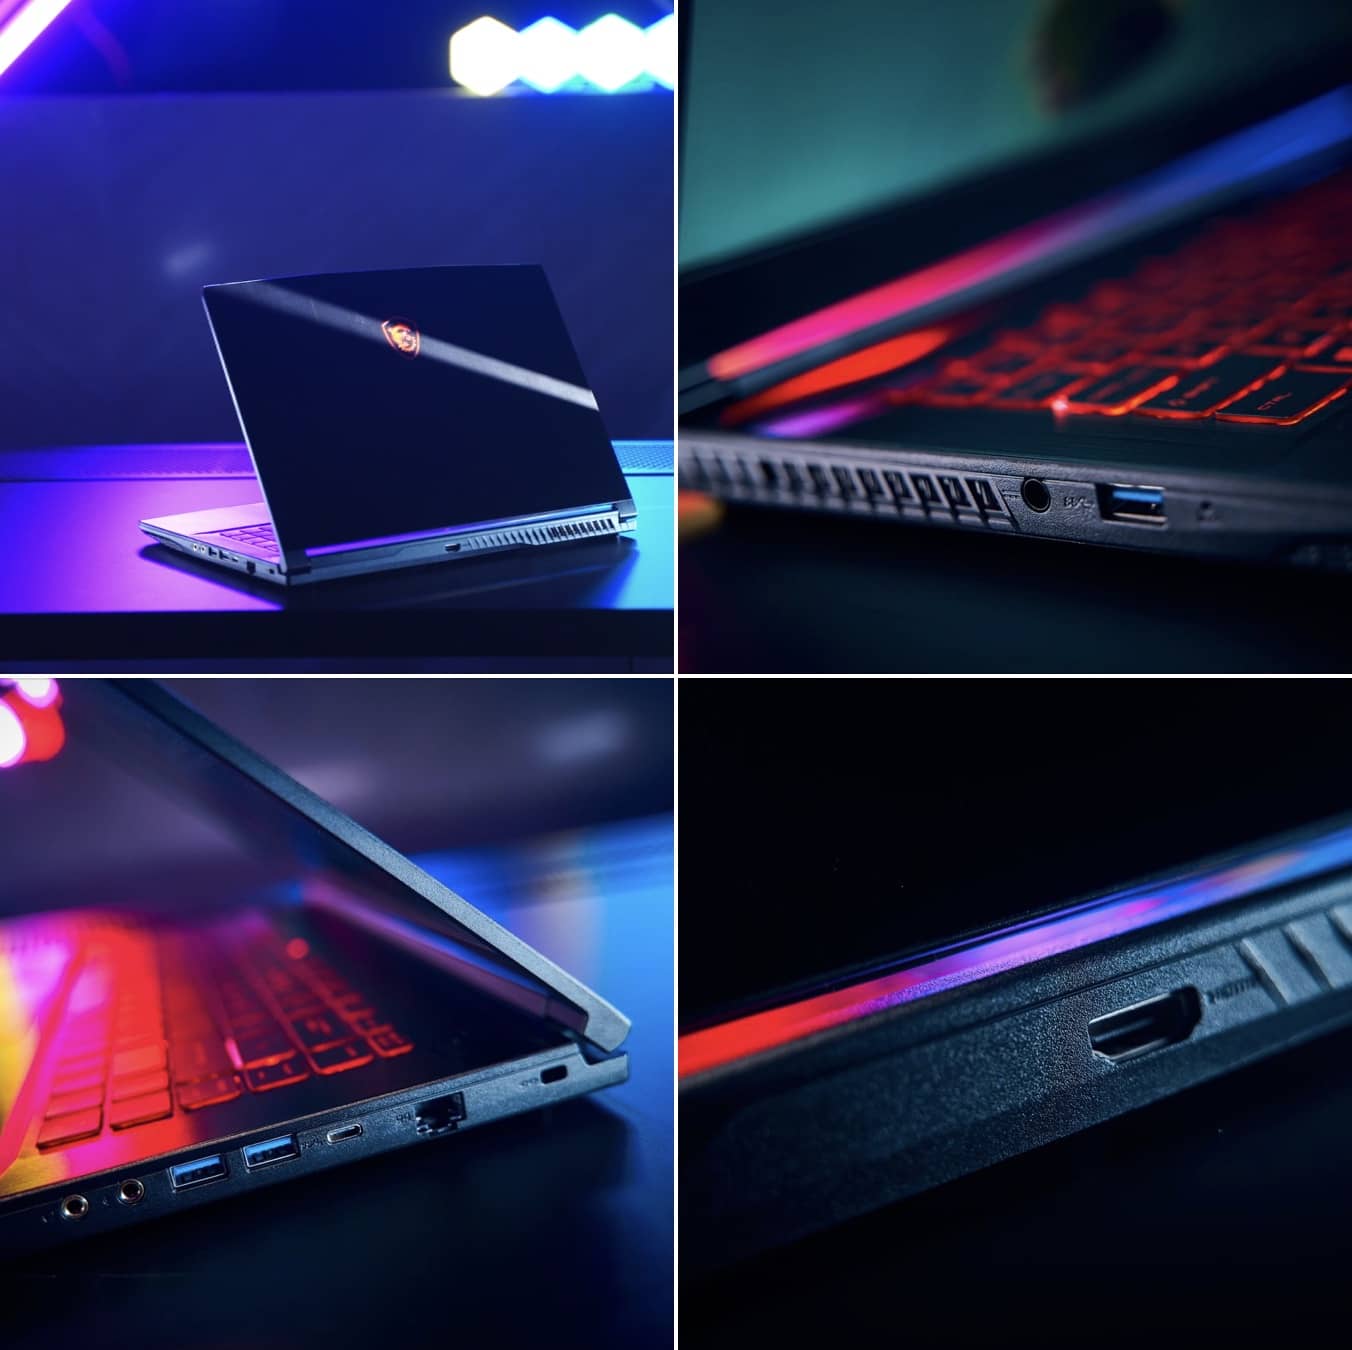 The GF63 Thin by MSI gaming laptop